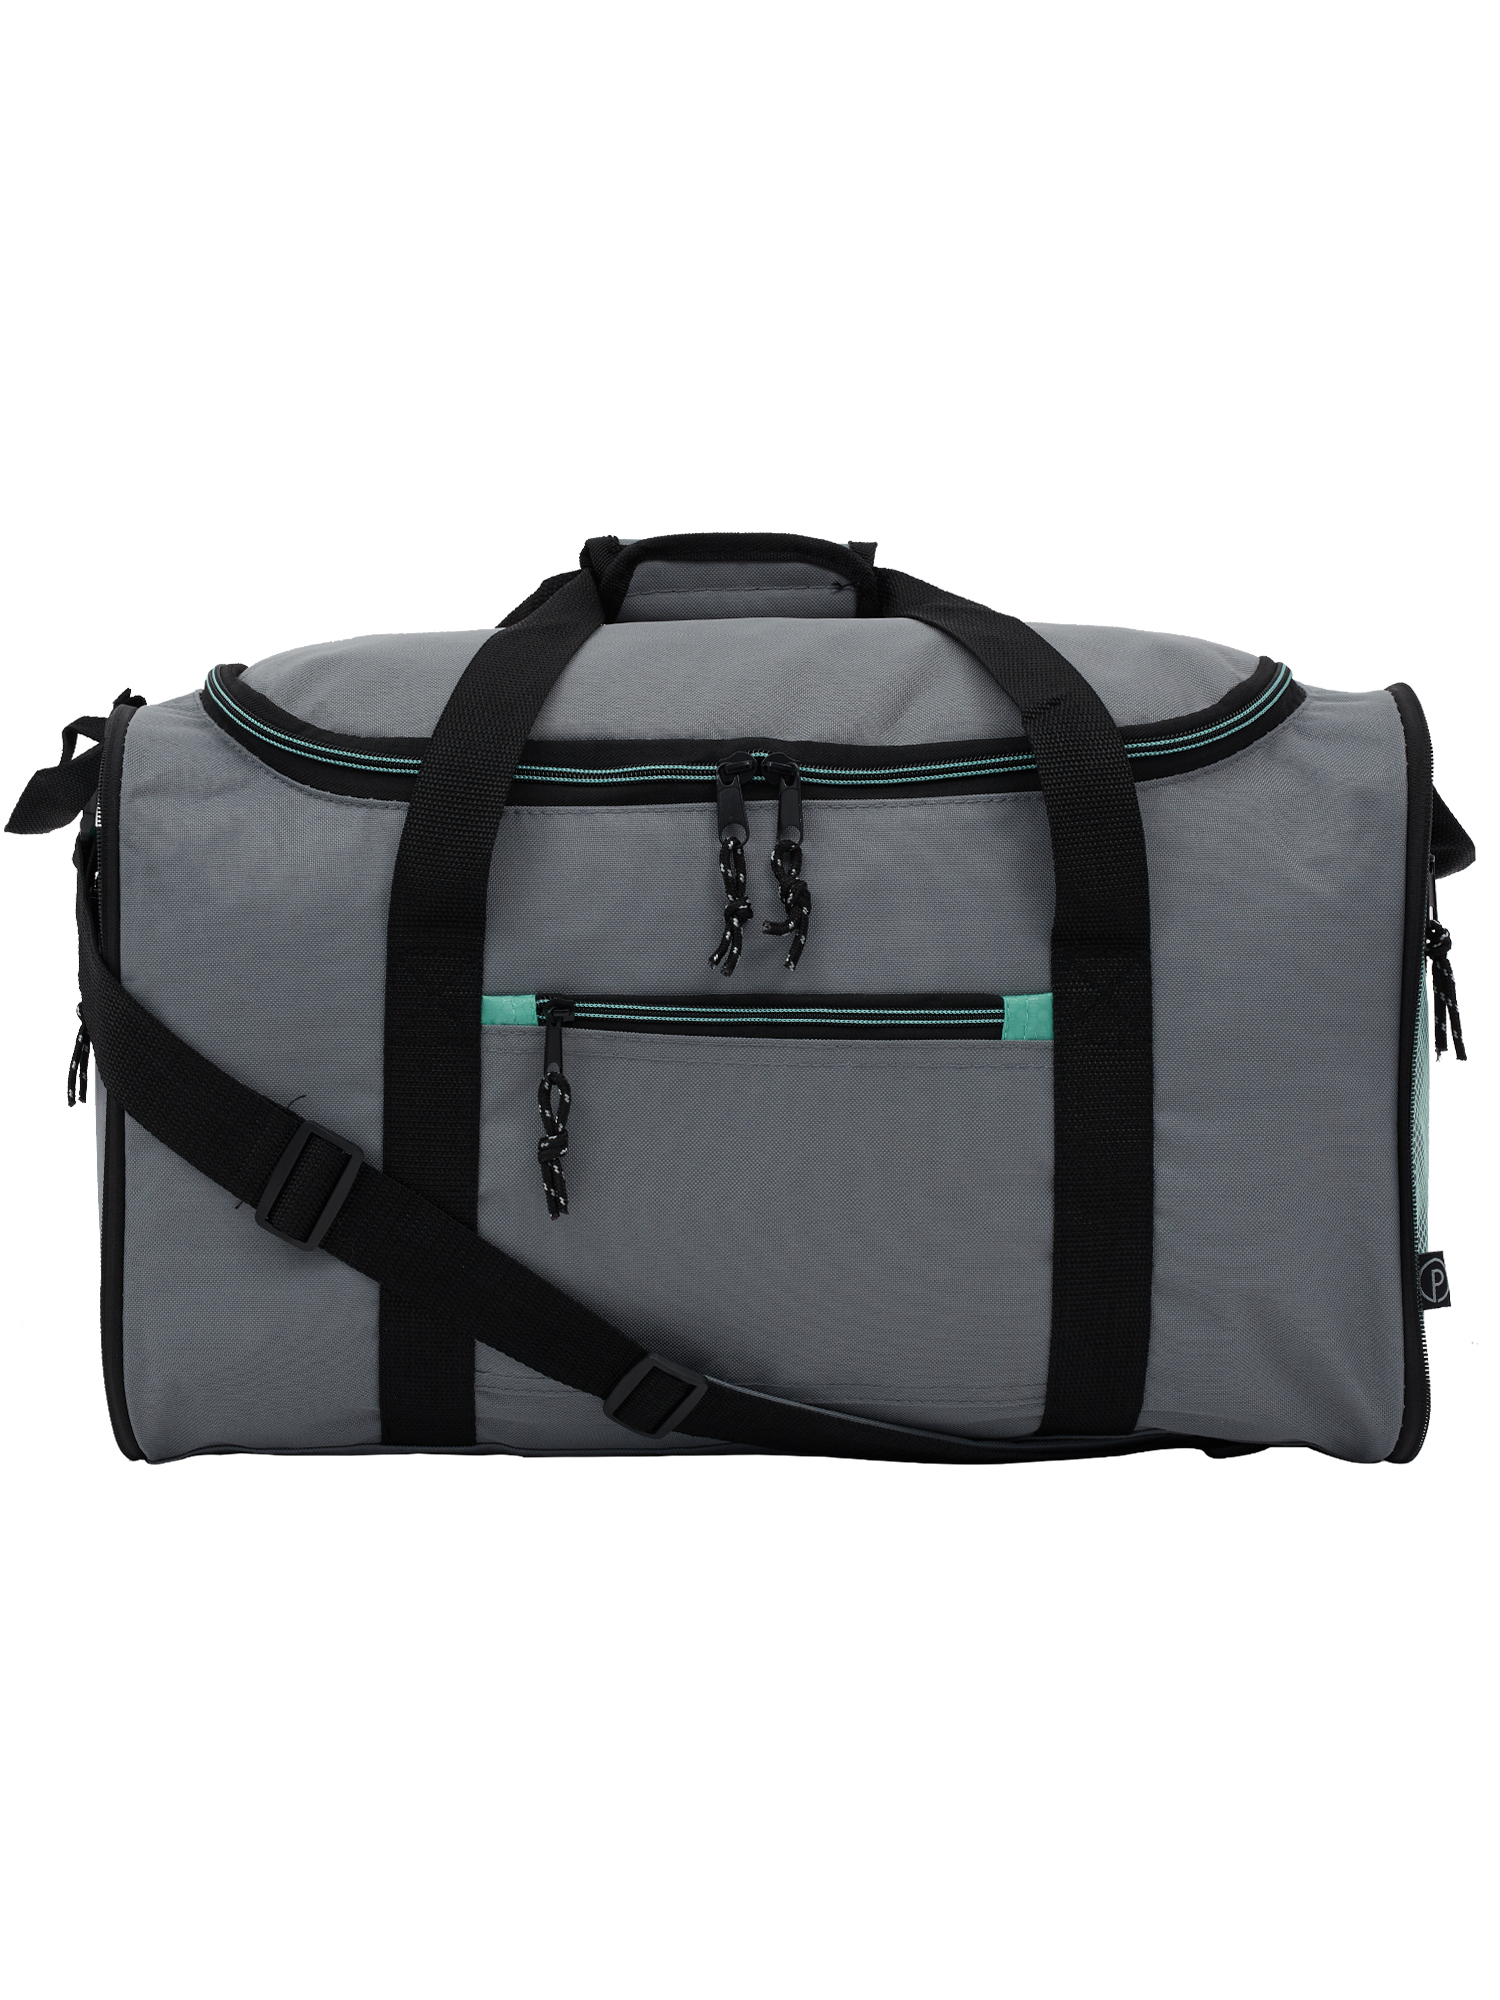 Protégé 20" Collapsible Polyester Sport and Travel Duffel Bag, Gray - image 1 of 9